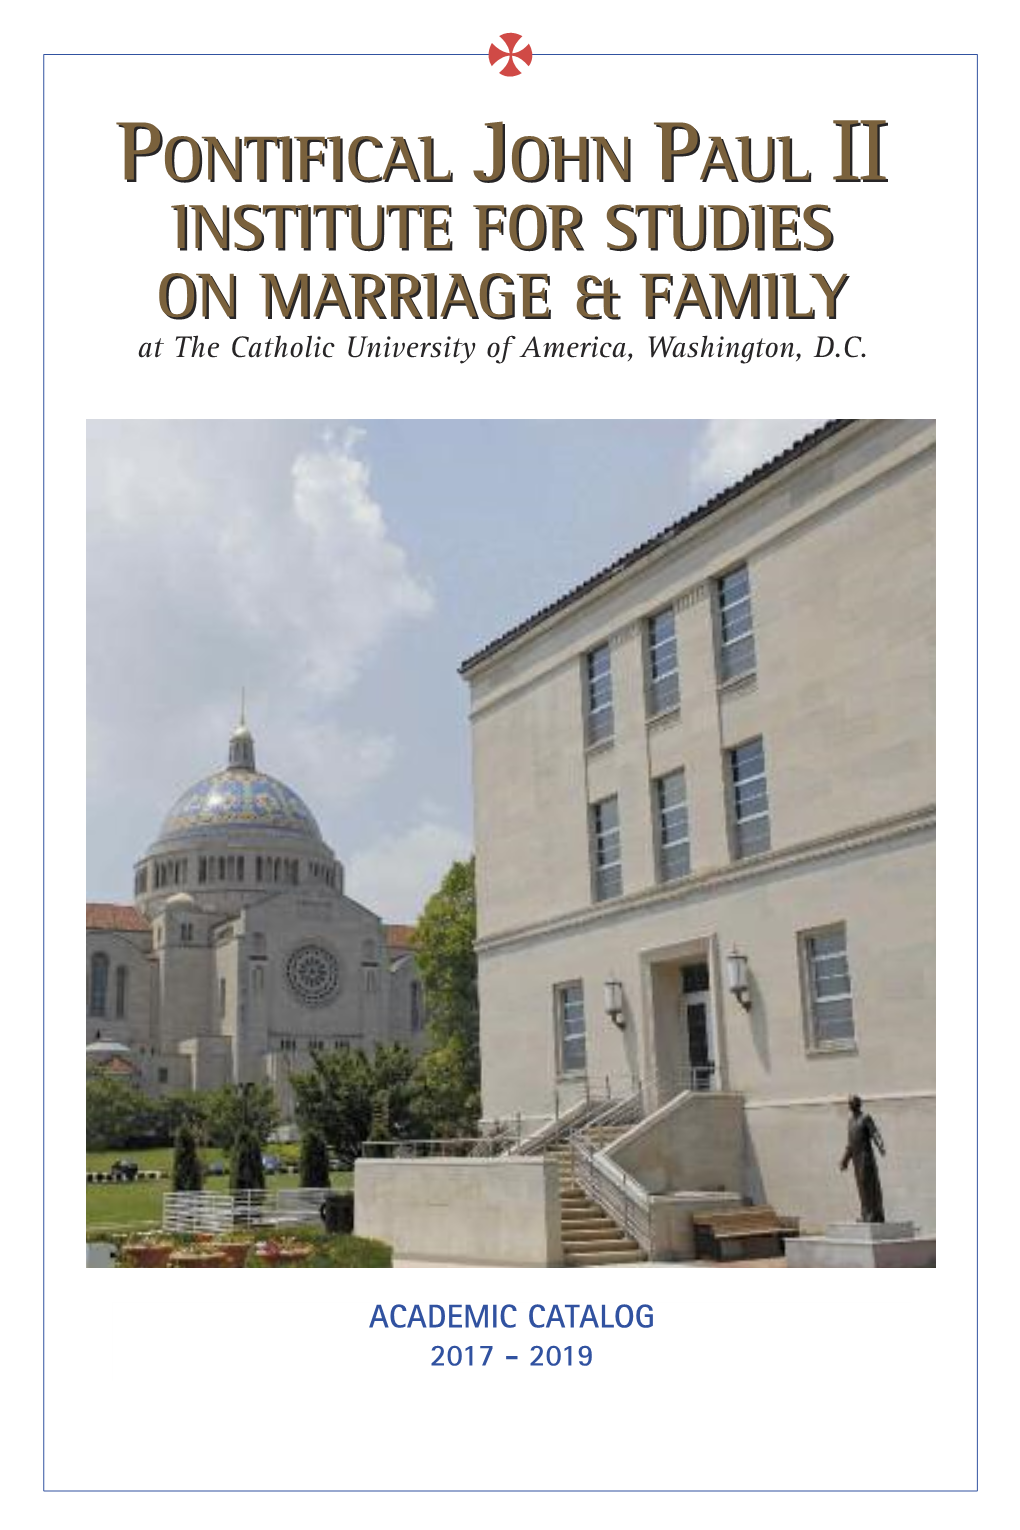 Institute for Studies on Marriage & Family